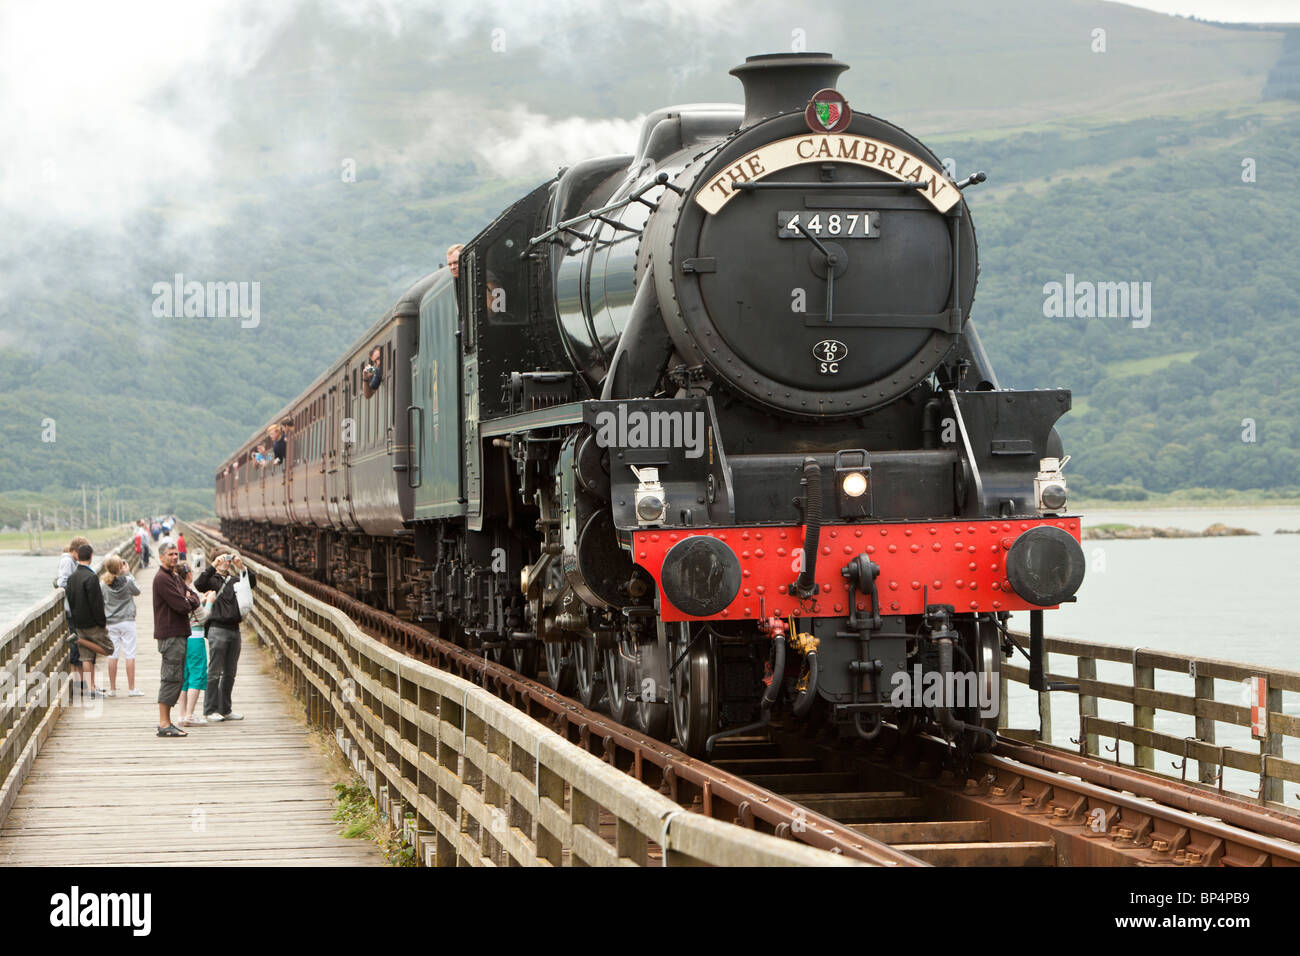 LMS 4-6-0 Black 5 locomotive number 44871 pulling 'The Cambrian', crossing the Barmouth Bridge, West Wales. Stock Photo